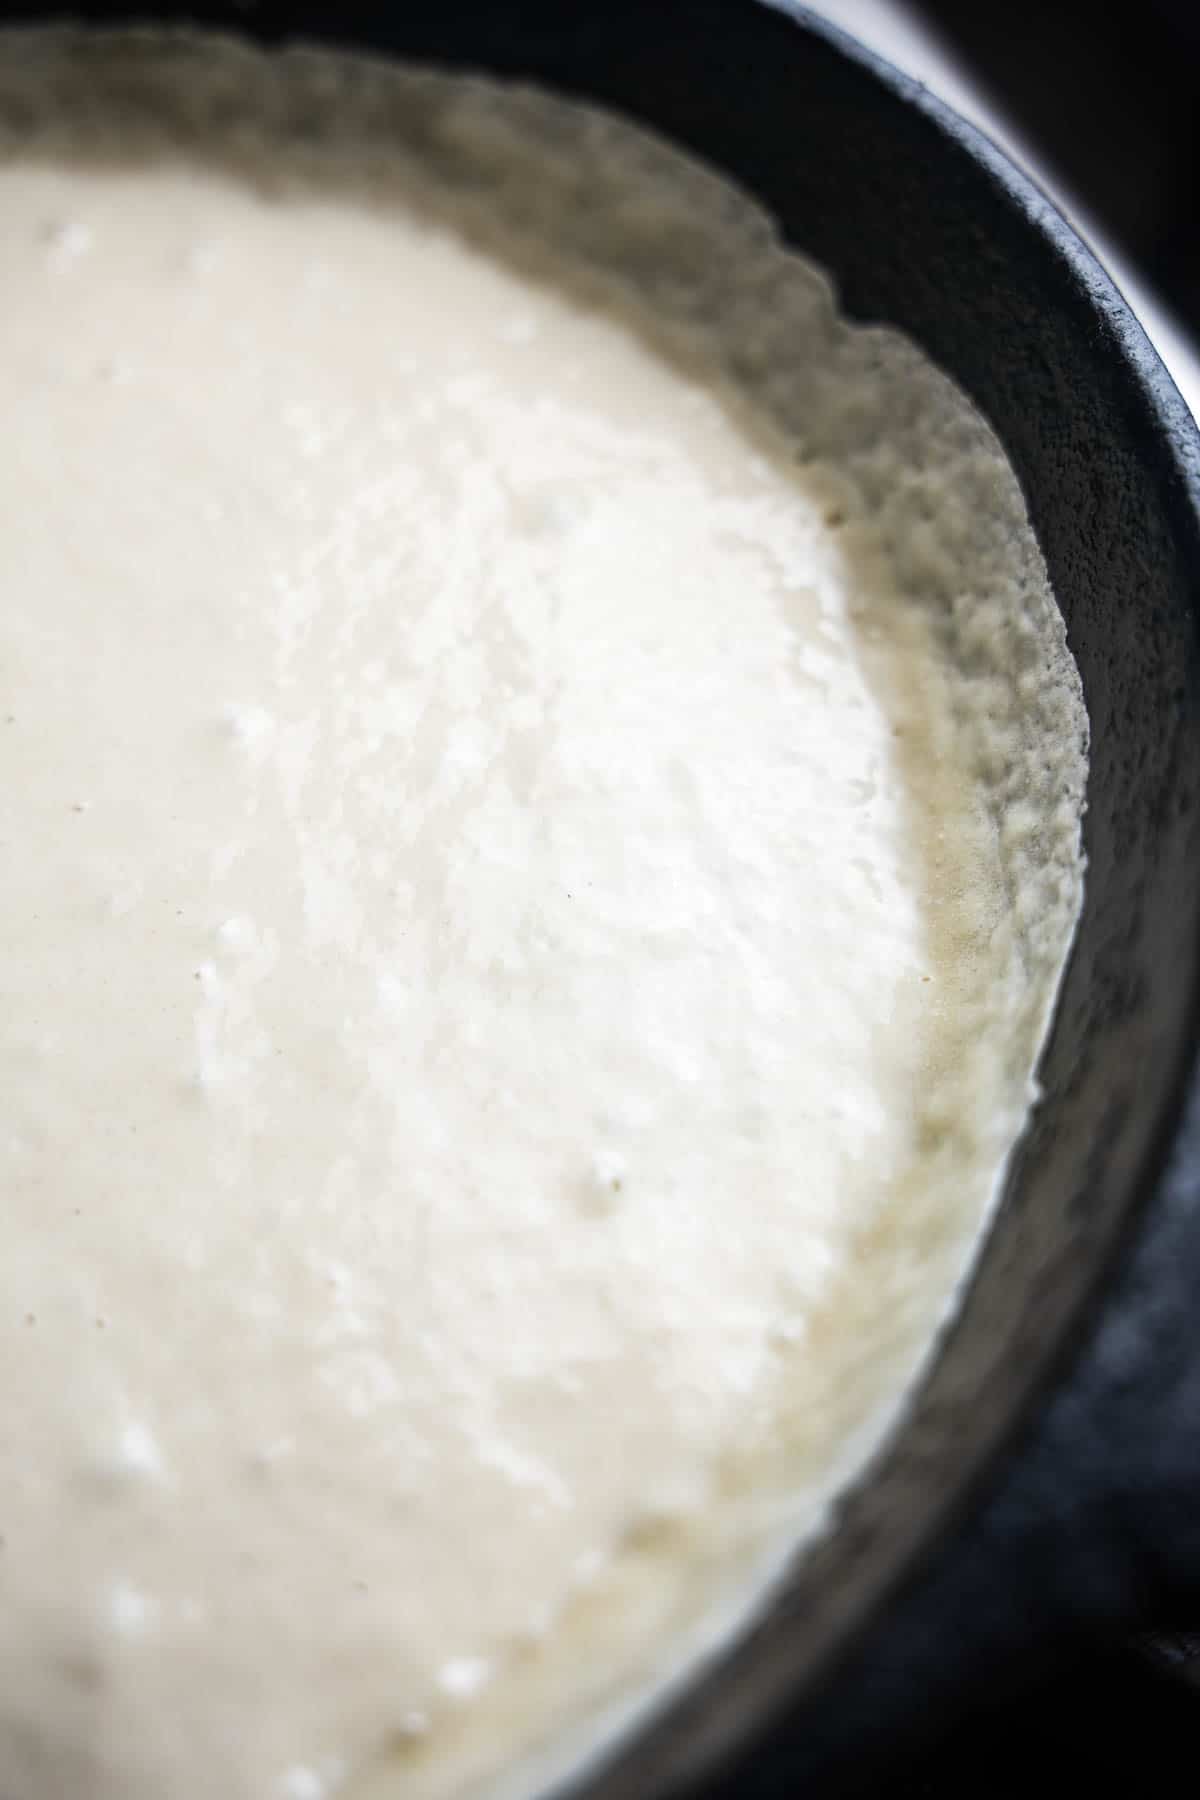 Batter is going up the sides of the pan forming a thin crisp edge all around the pancake.